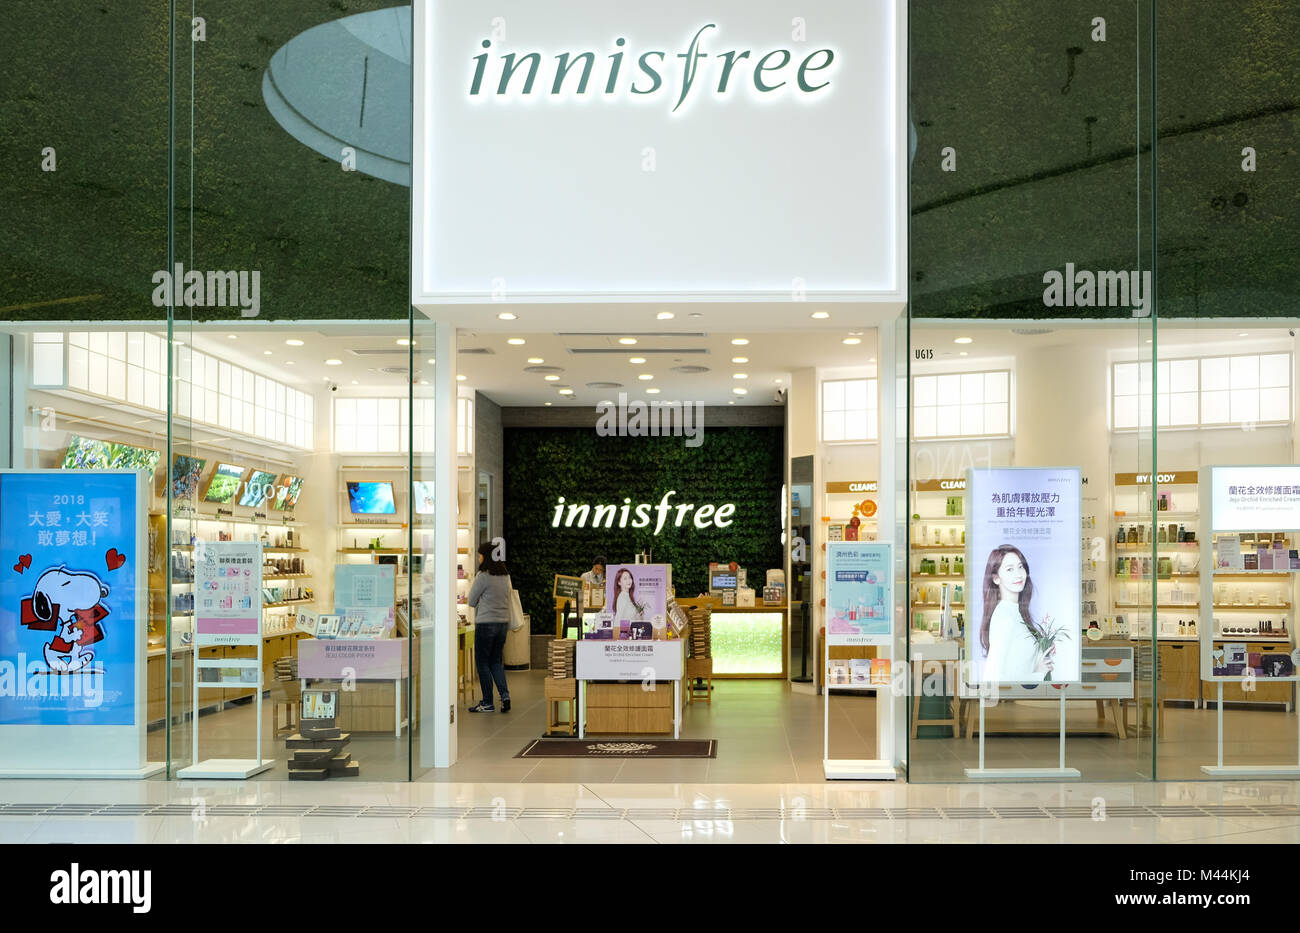 HONG KONG - FEBRUARY 4, 2018: Innisfree shop in Hong Kong. Innisfree is a South Korean cosmetics brand owned by Amore Pacific. Stock Photo